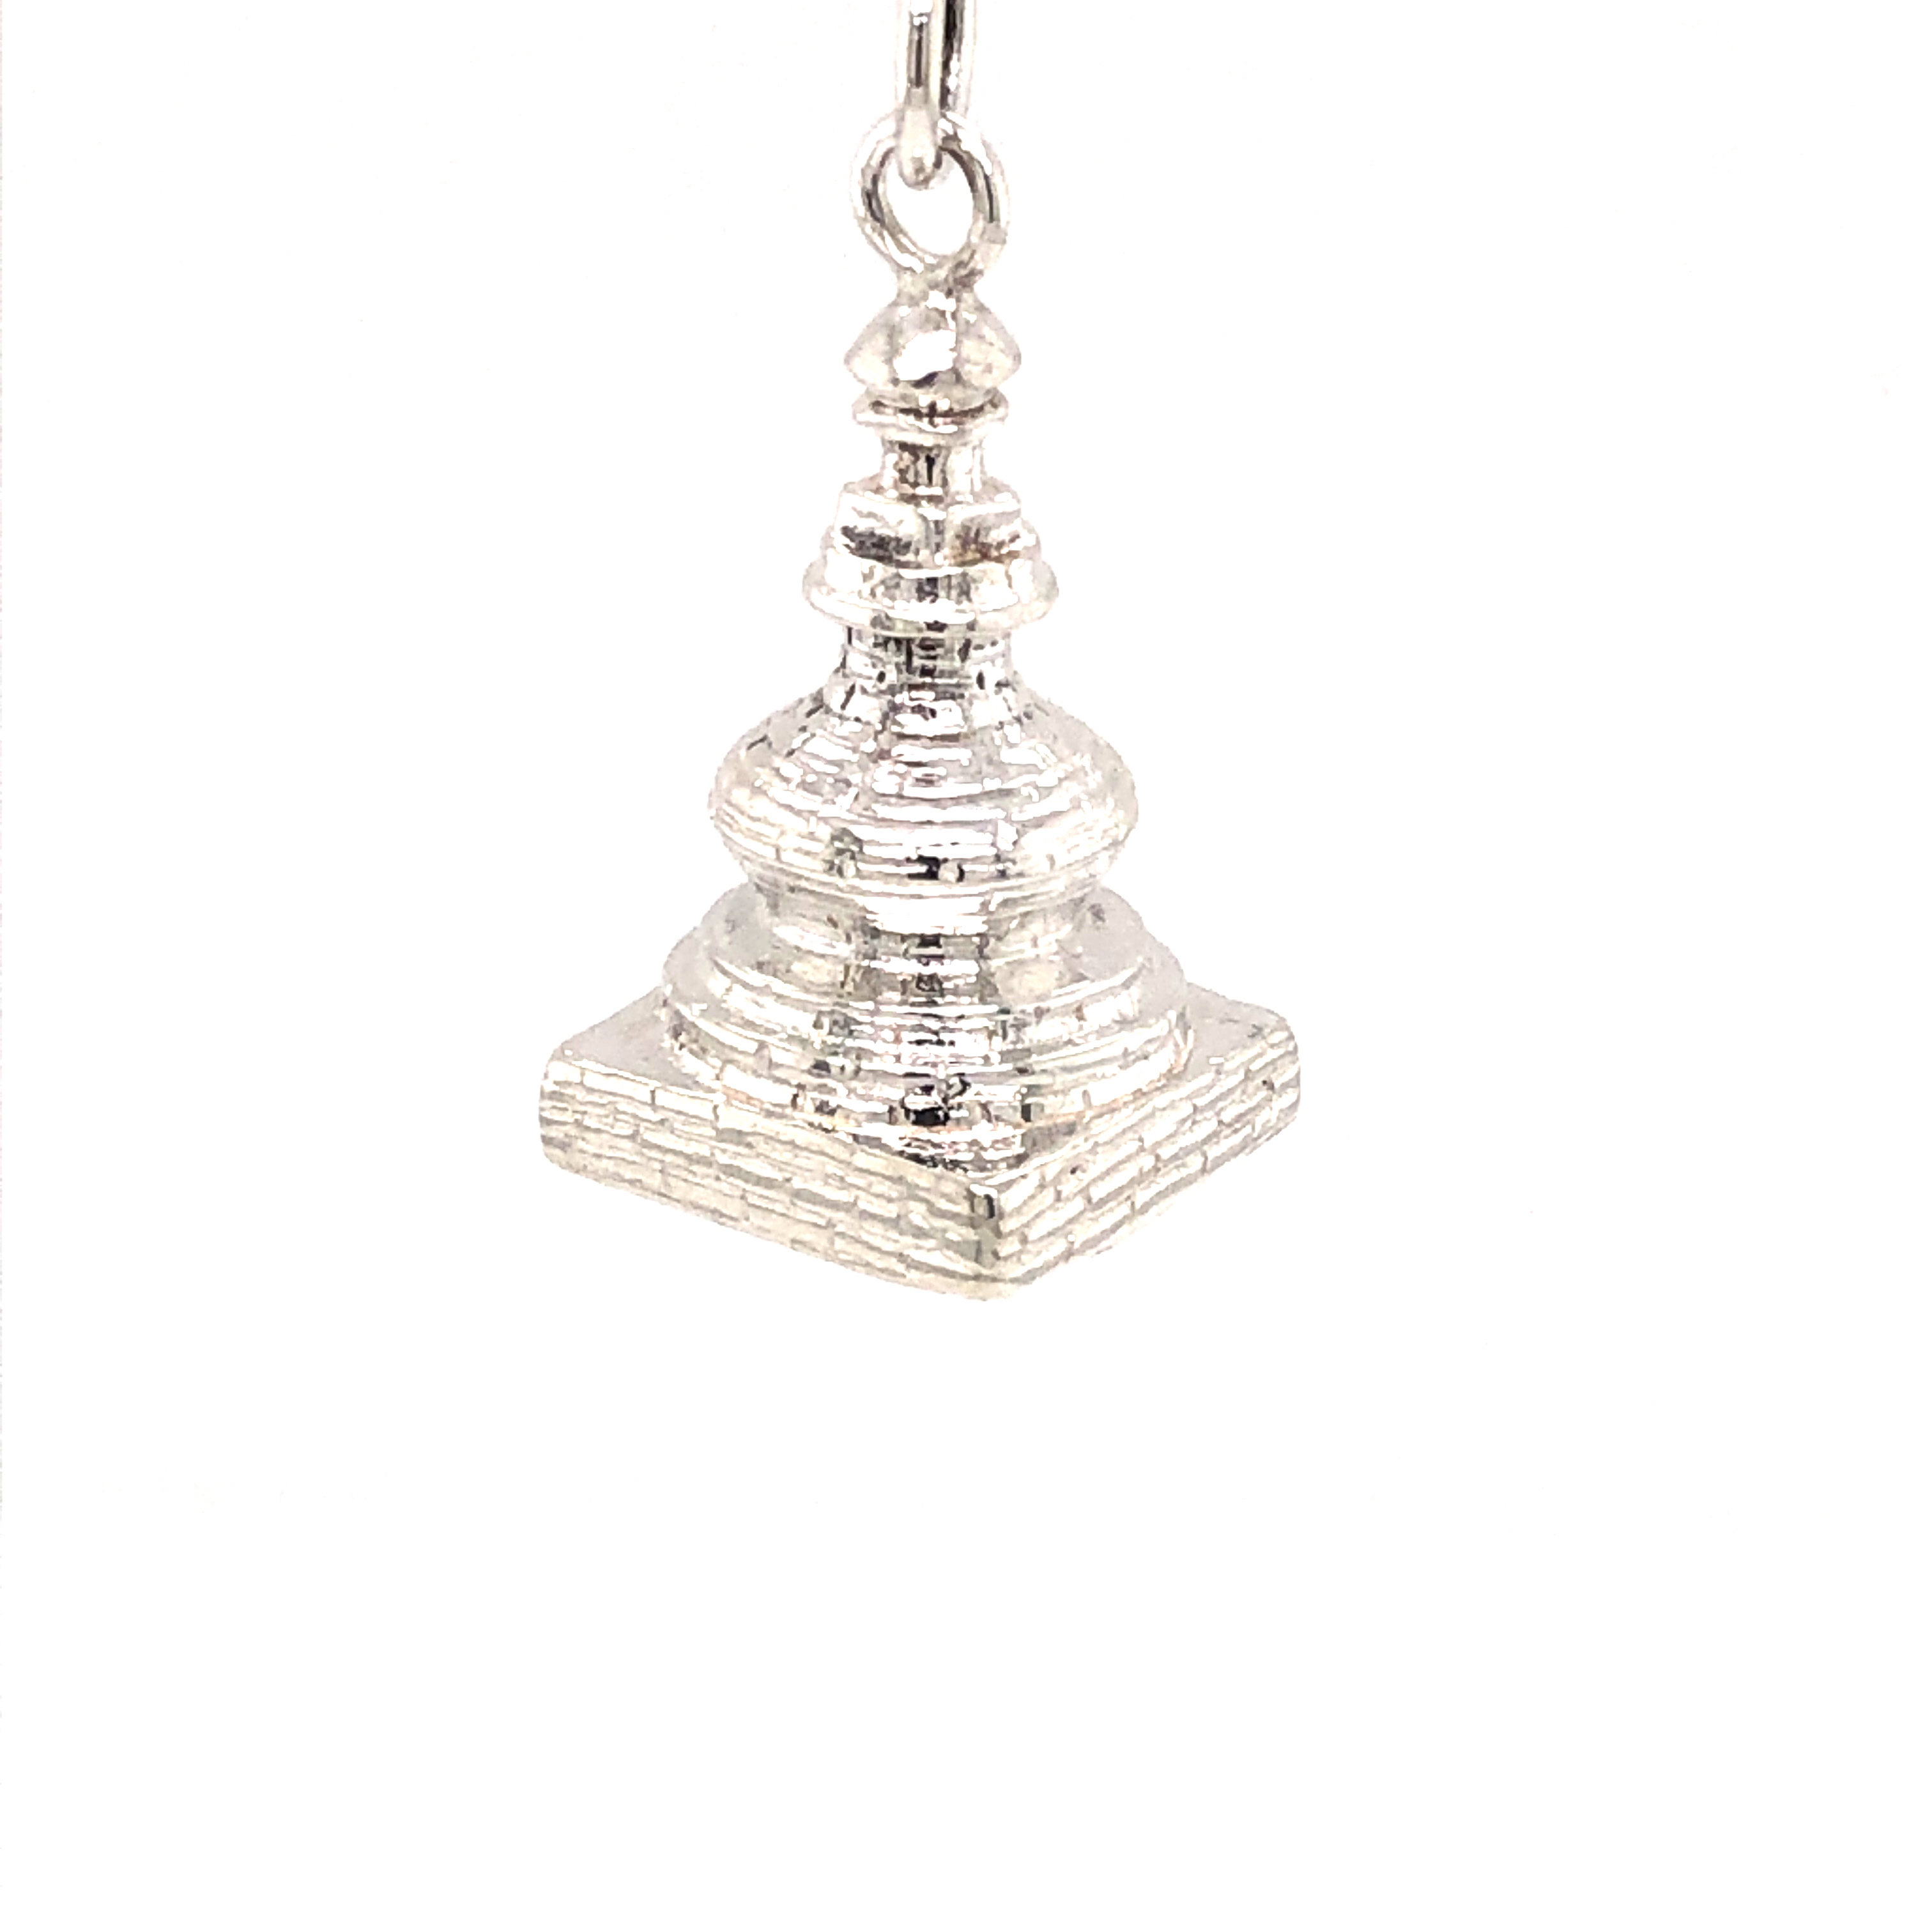 Colonial Exclusive Sterling Silver Jug Chest Charm